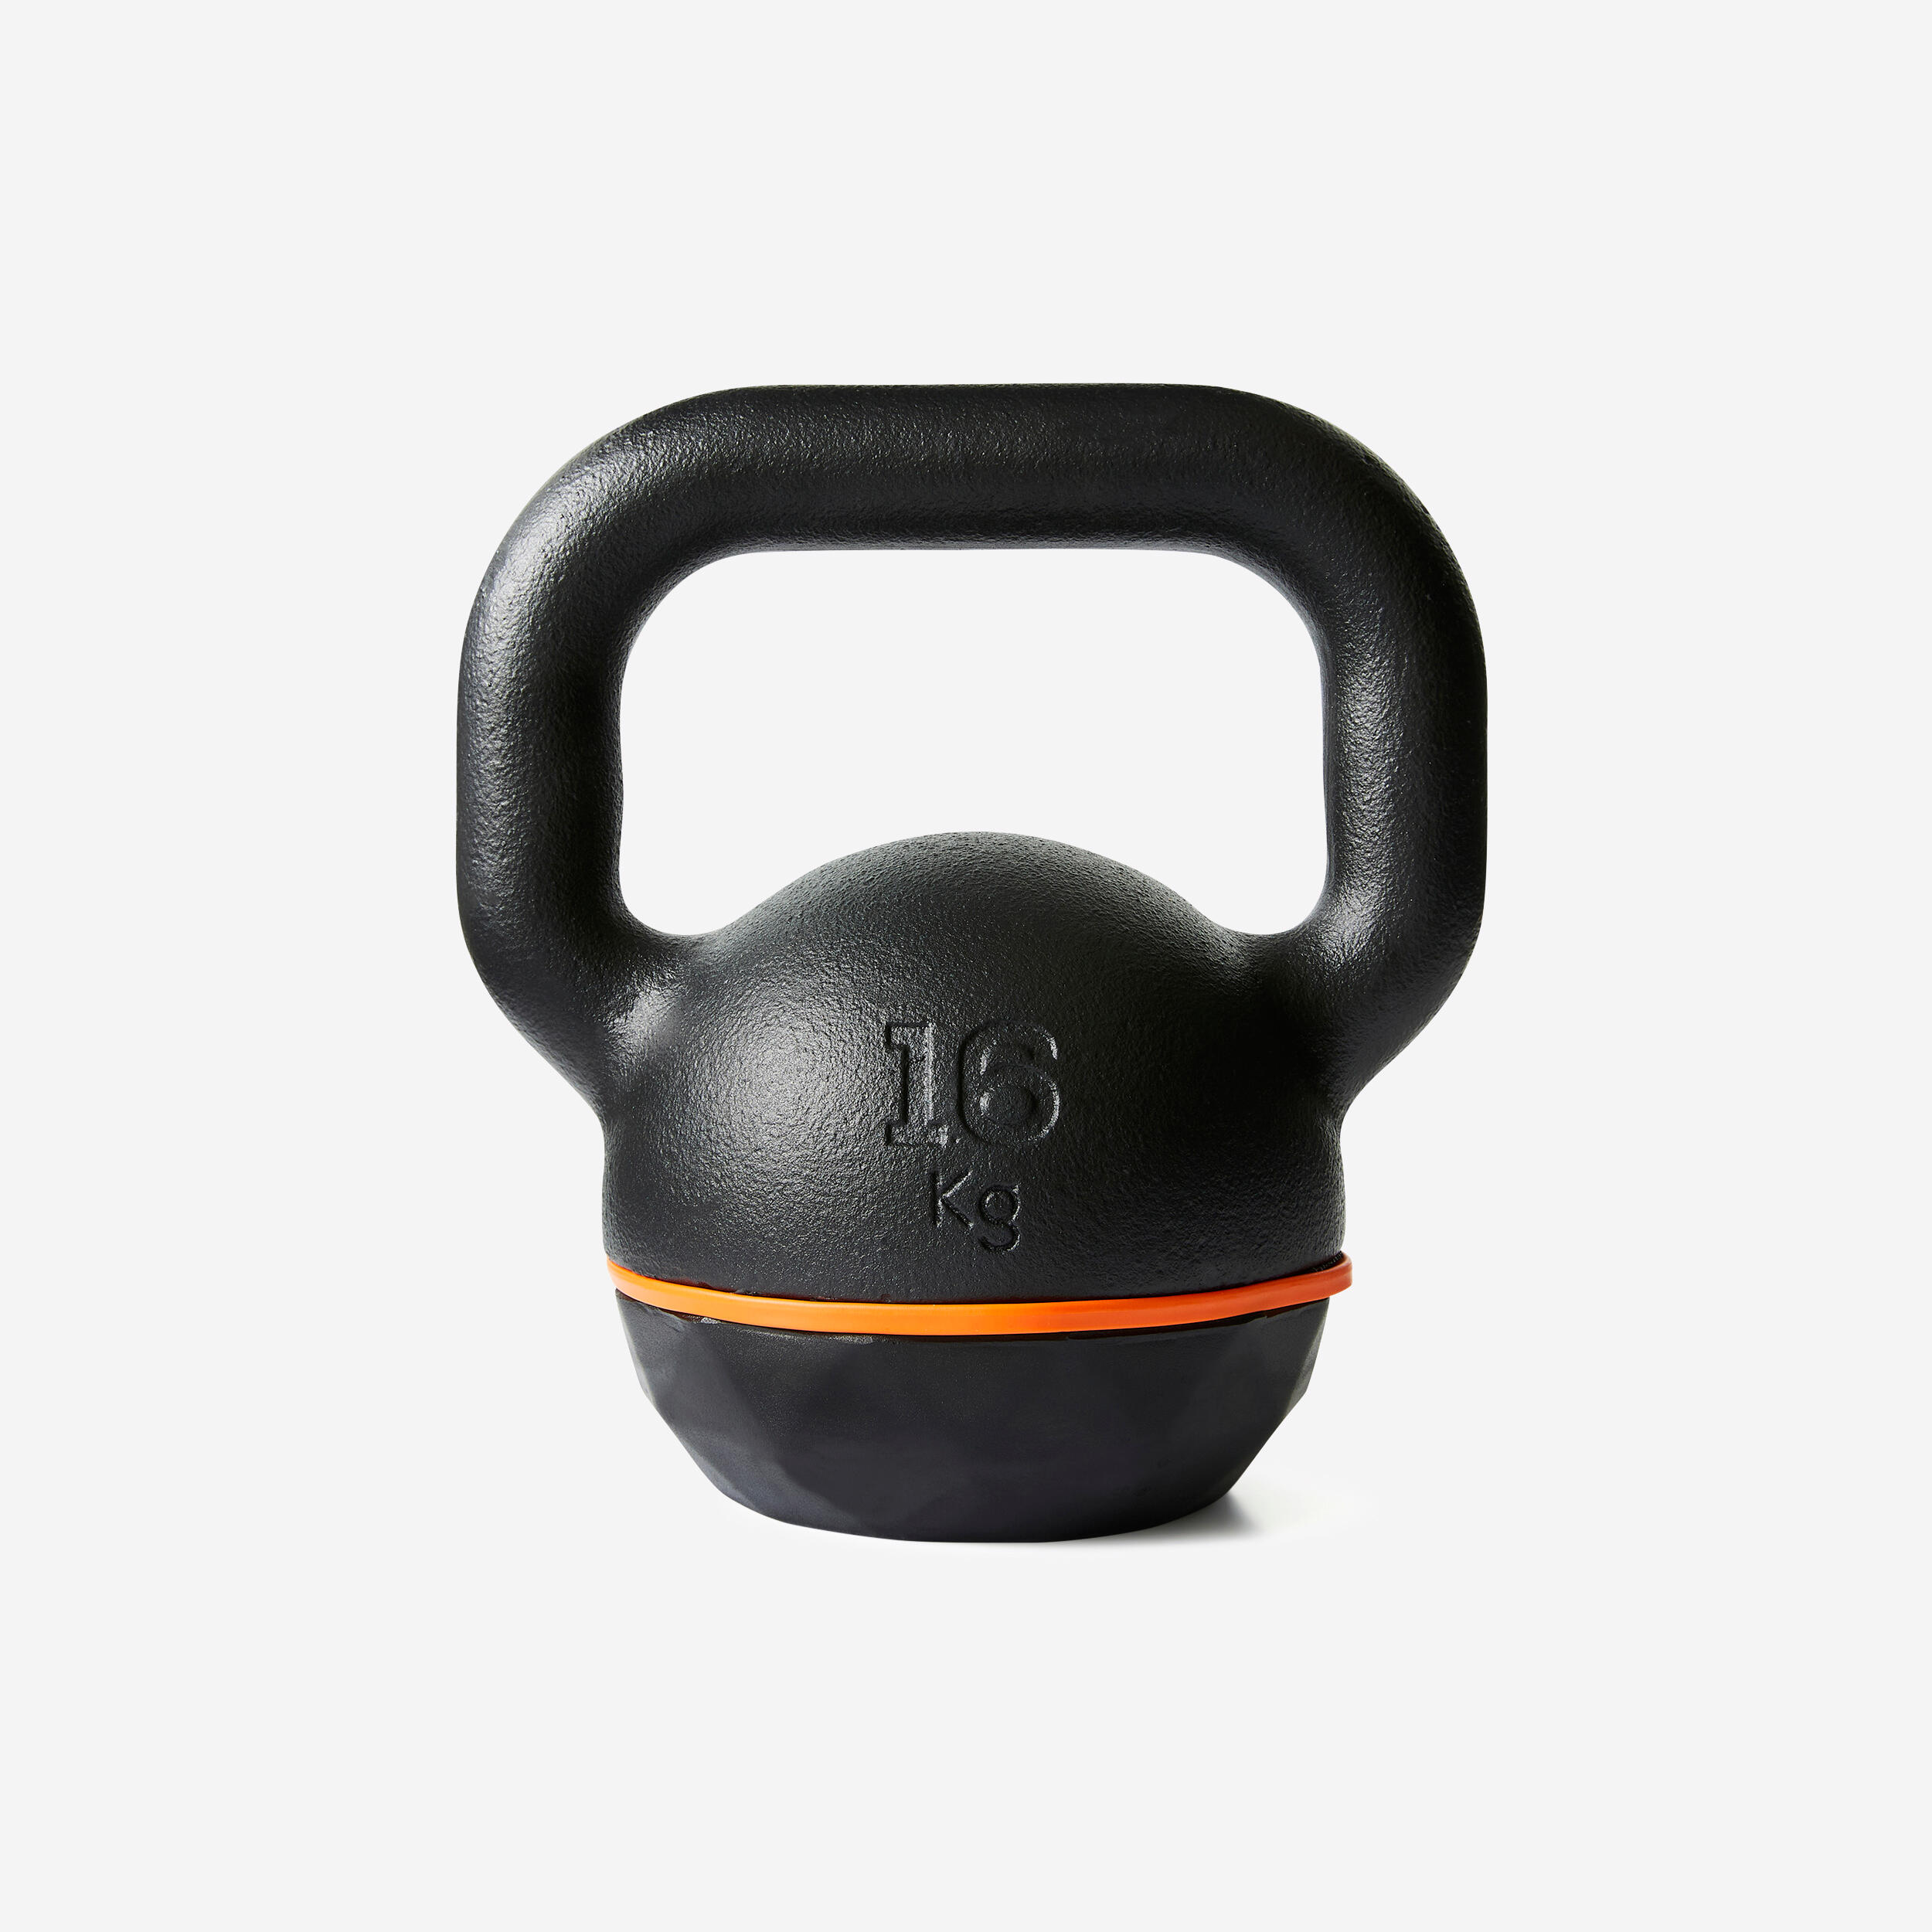 CORENGTH Cast Iron Kettlebell with Rubber Base - 16 kg